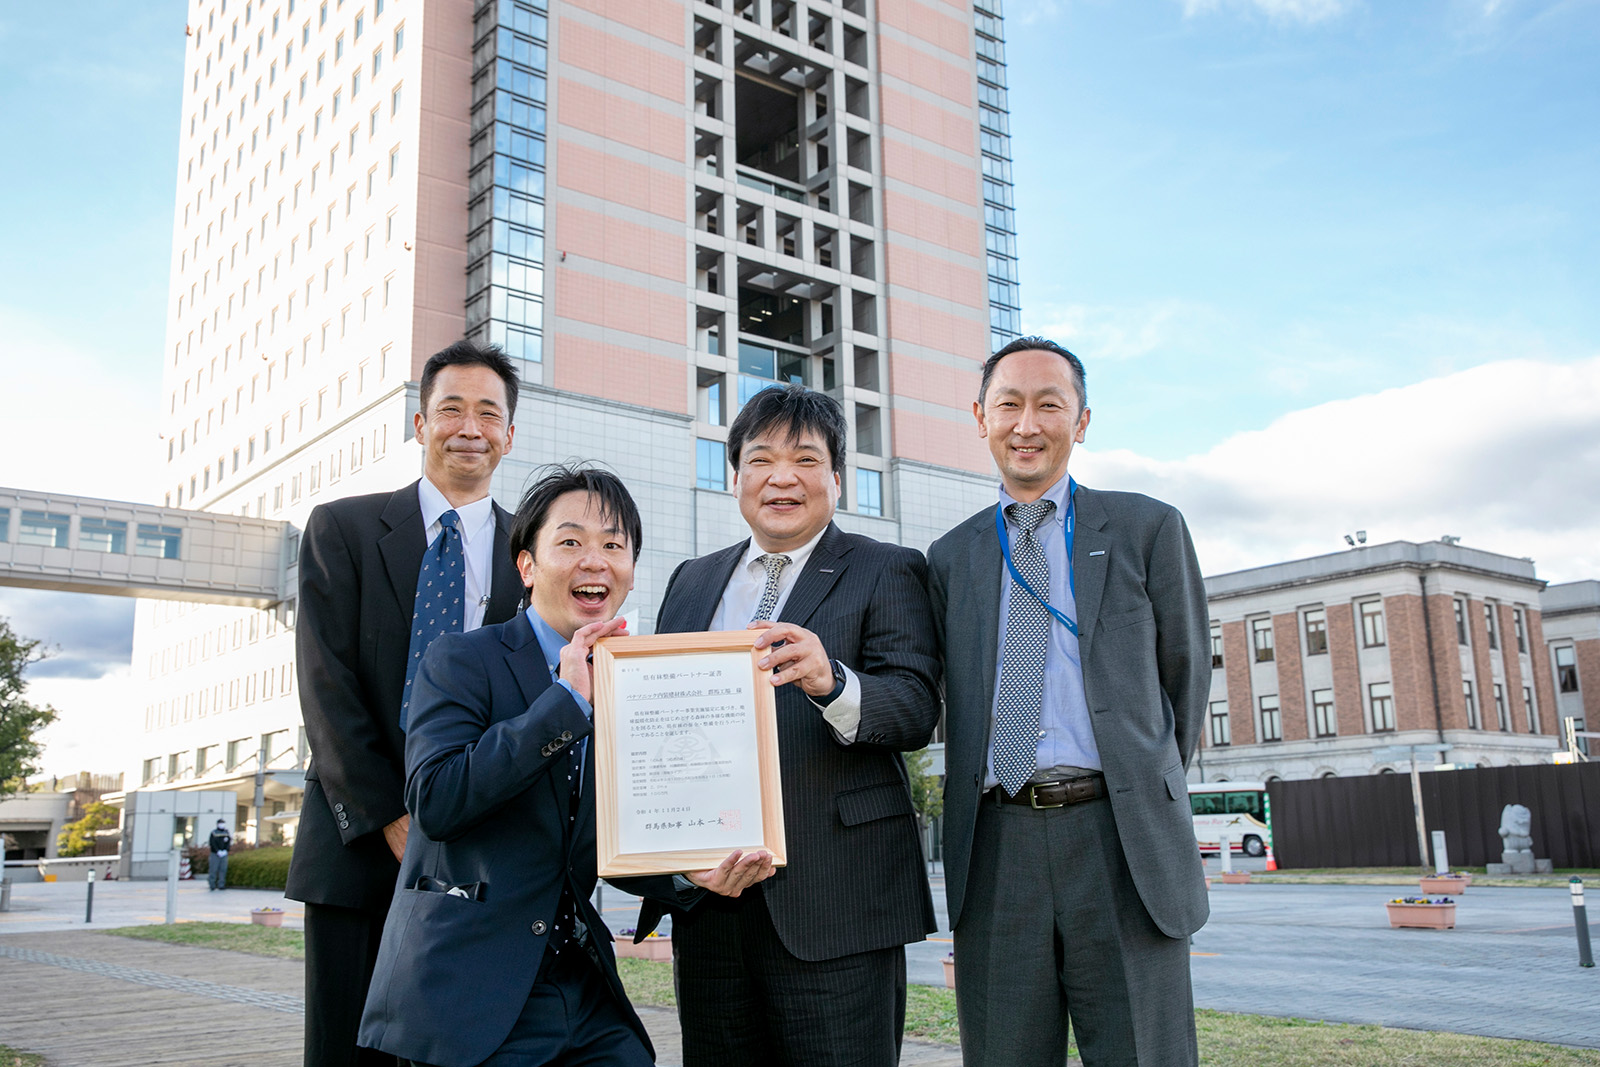 Photo: Yoshigai (second from left) in front of the Gunma Prefectural Government Building following the signing ceremony.